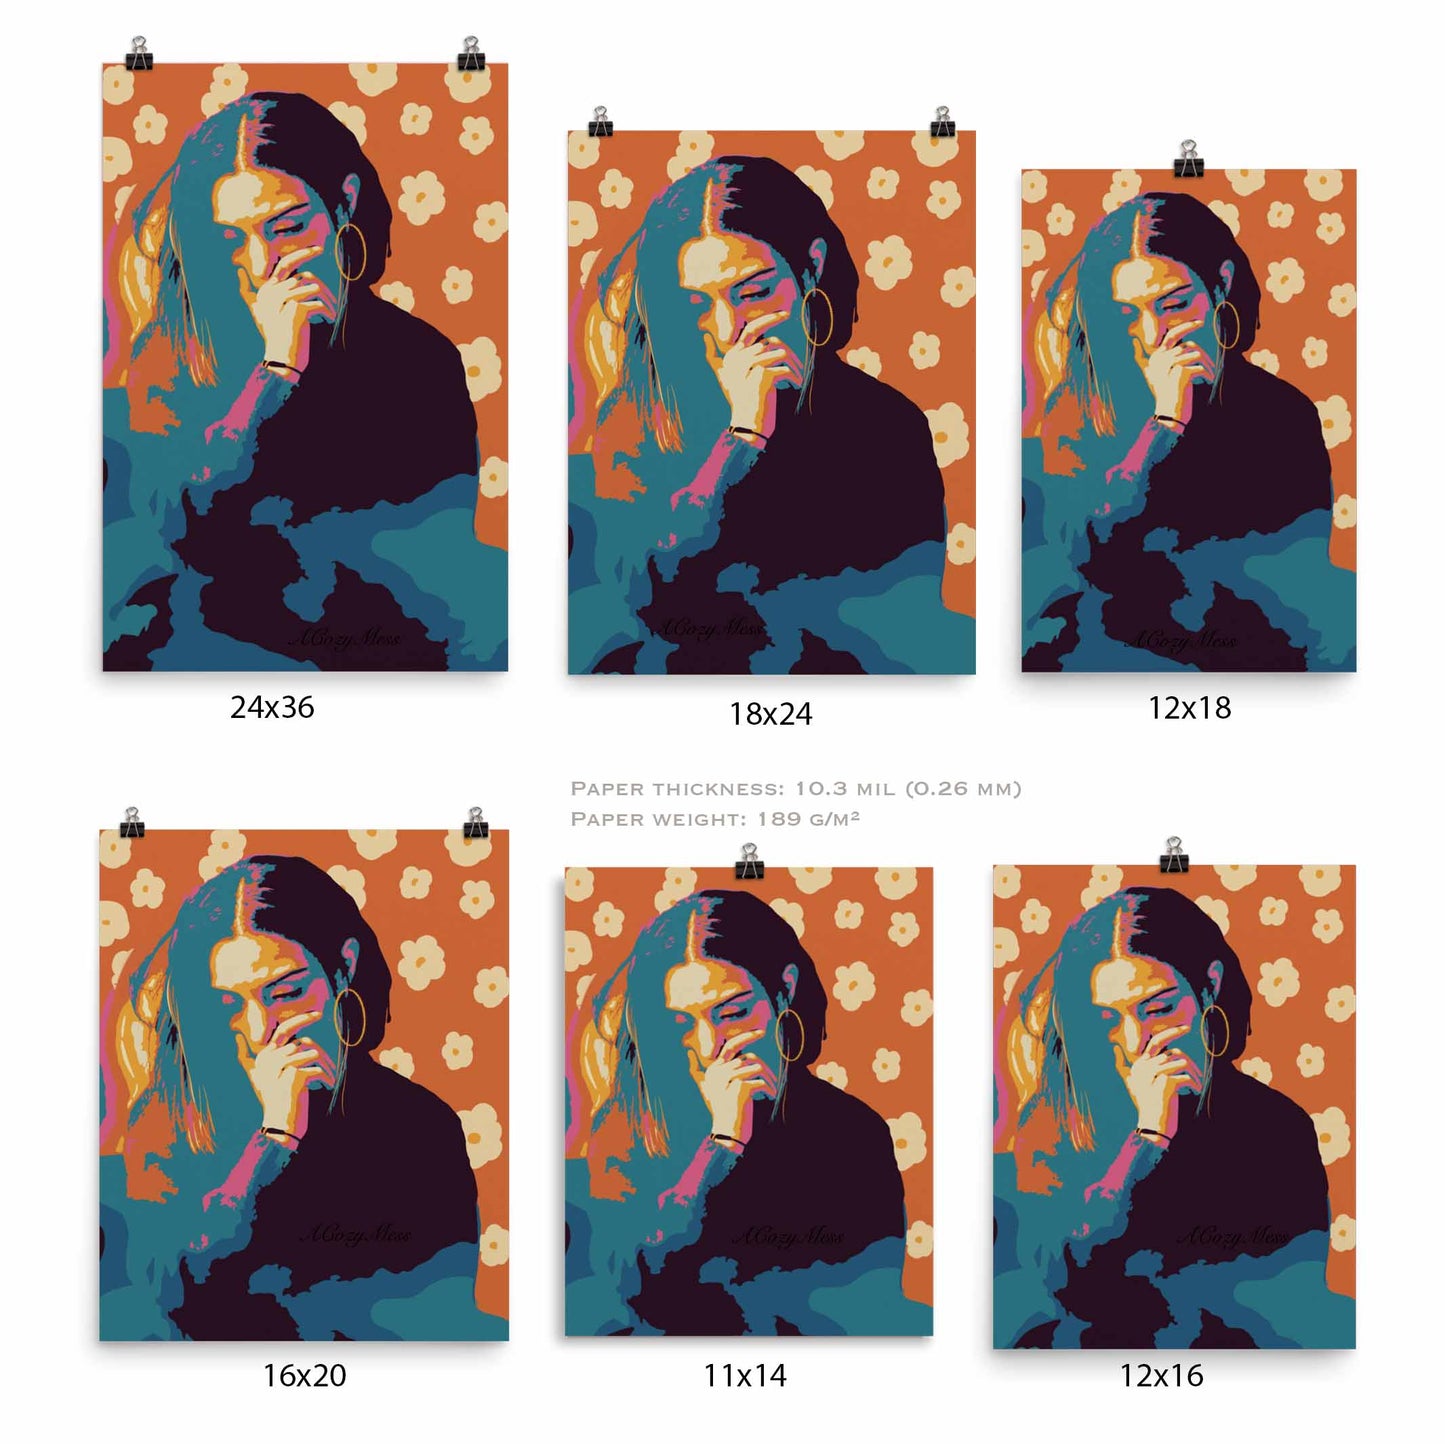 Expressive Colorful Abstract wall art of a woman with floral background posters available in different sizes